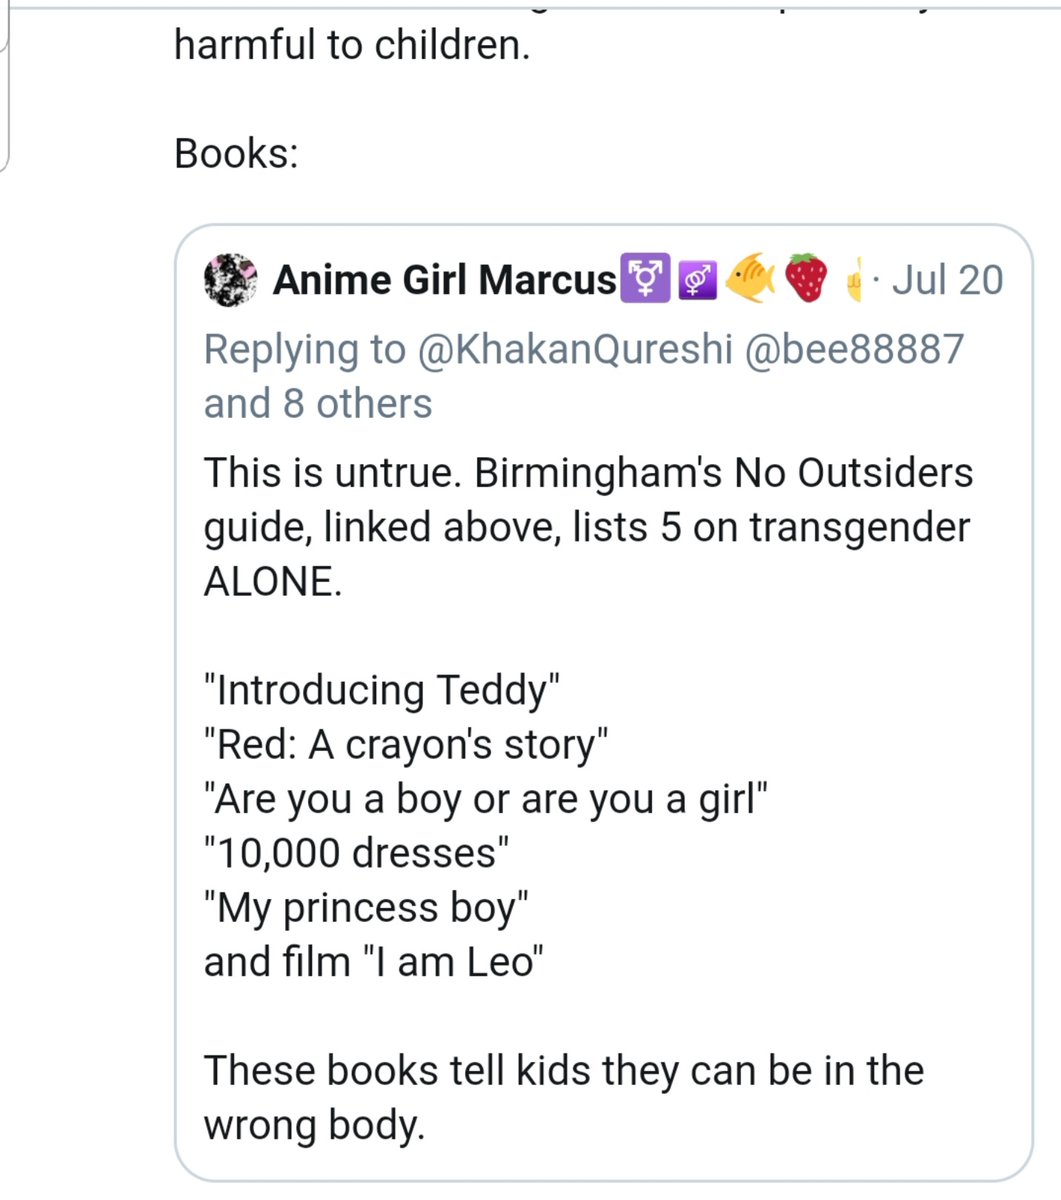 Moffat's Spiel in 2020 at New Horizons in British Islam conference he says, "only 4 books out of 35 with LGBT content" that provoked protests another gay man disagrees with him & exposes his lies & harm to gay kids